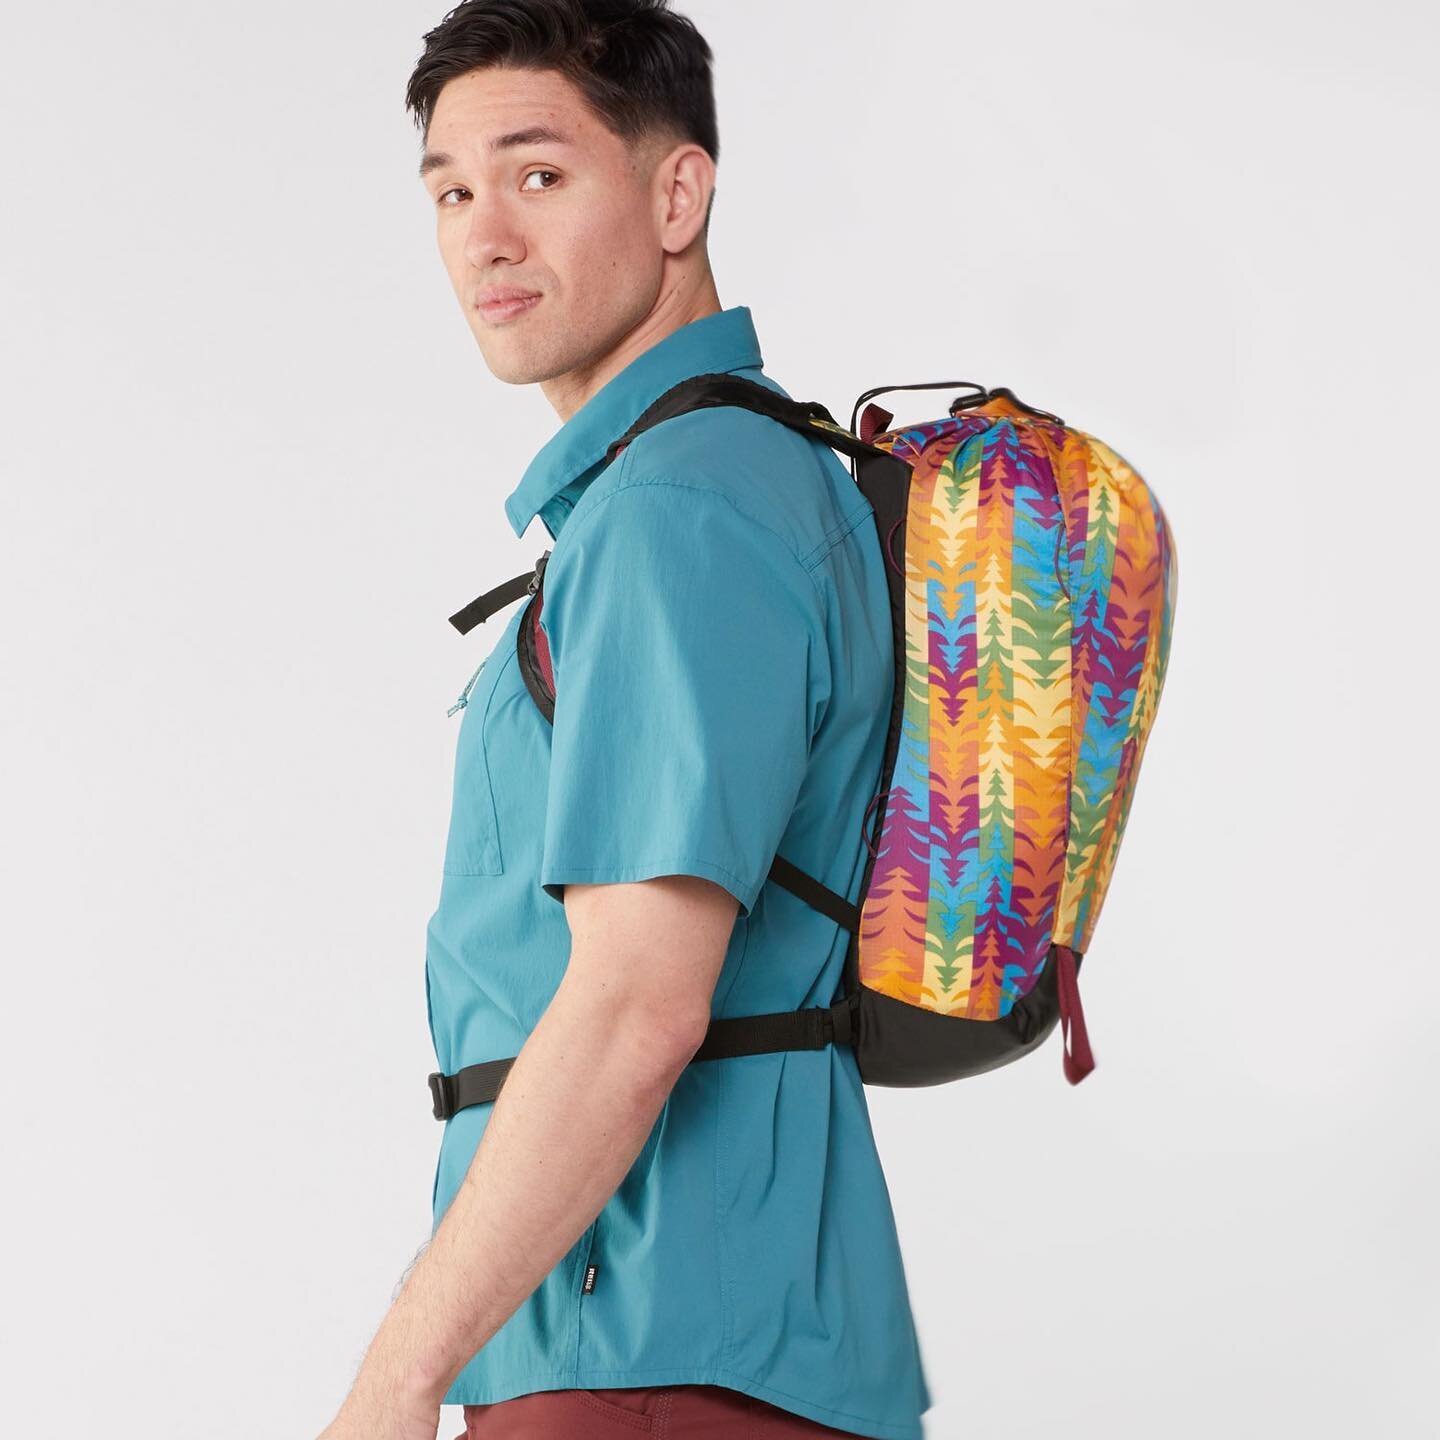 @rei provides more than $500,000 in annual support for programs and organizations working to achieve equality for LGBTQ+ people. This supports advocates at both the local and national levels who are working to ensure our society is safe, equitable an